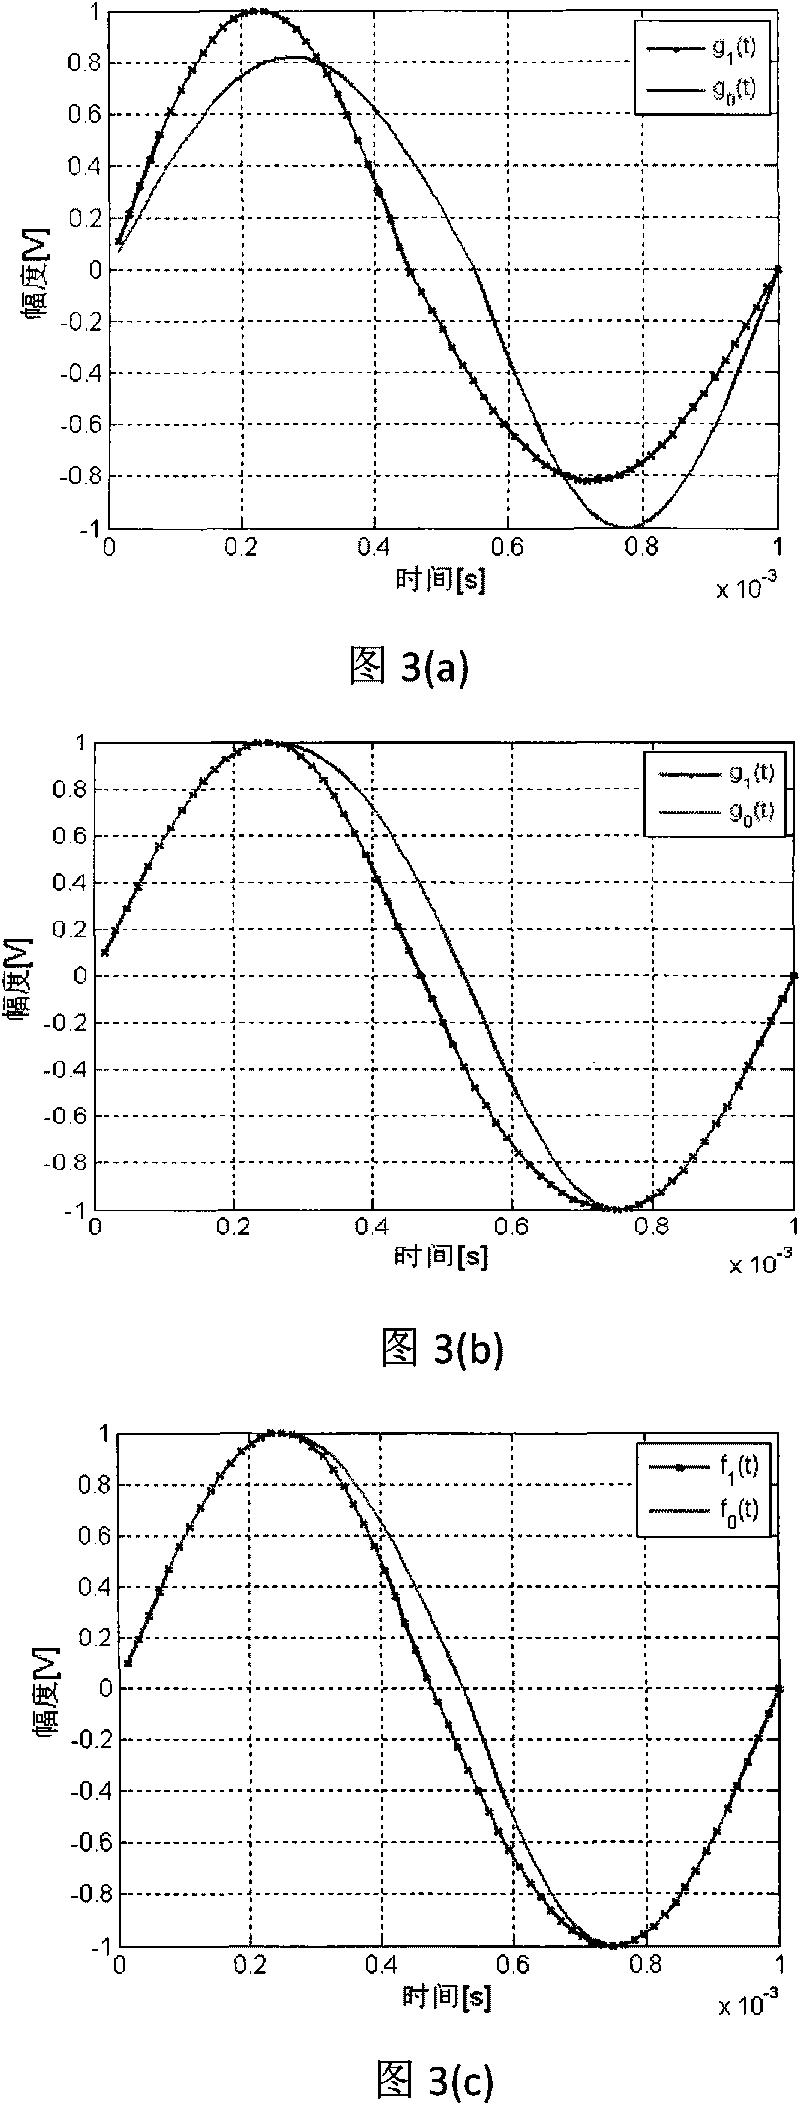 Compound signal transmission and communication method based on equal-amplitude equal-period modulated carrier wave technology